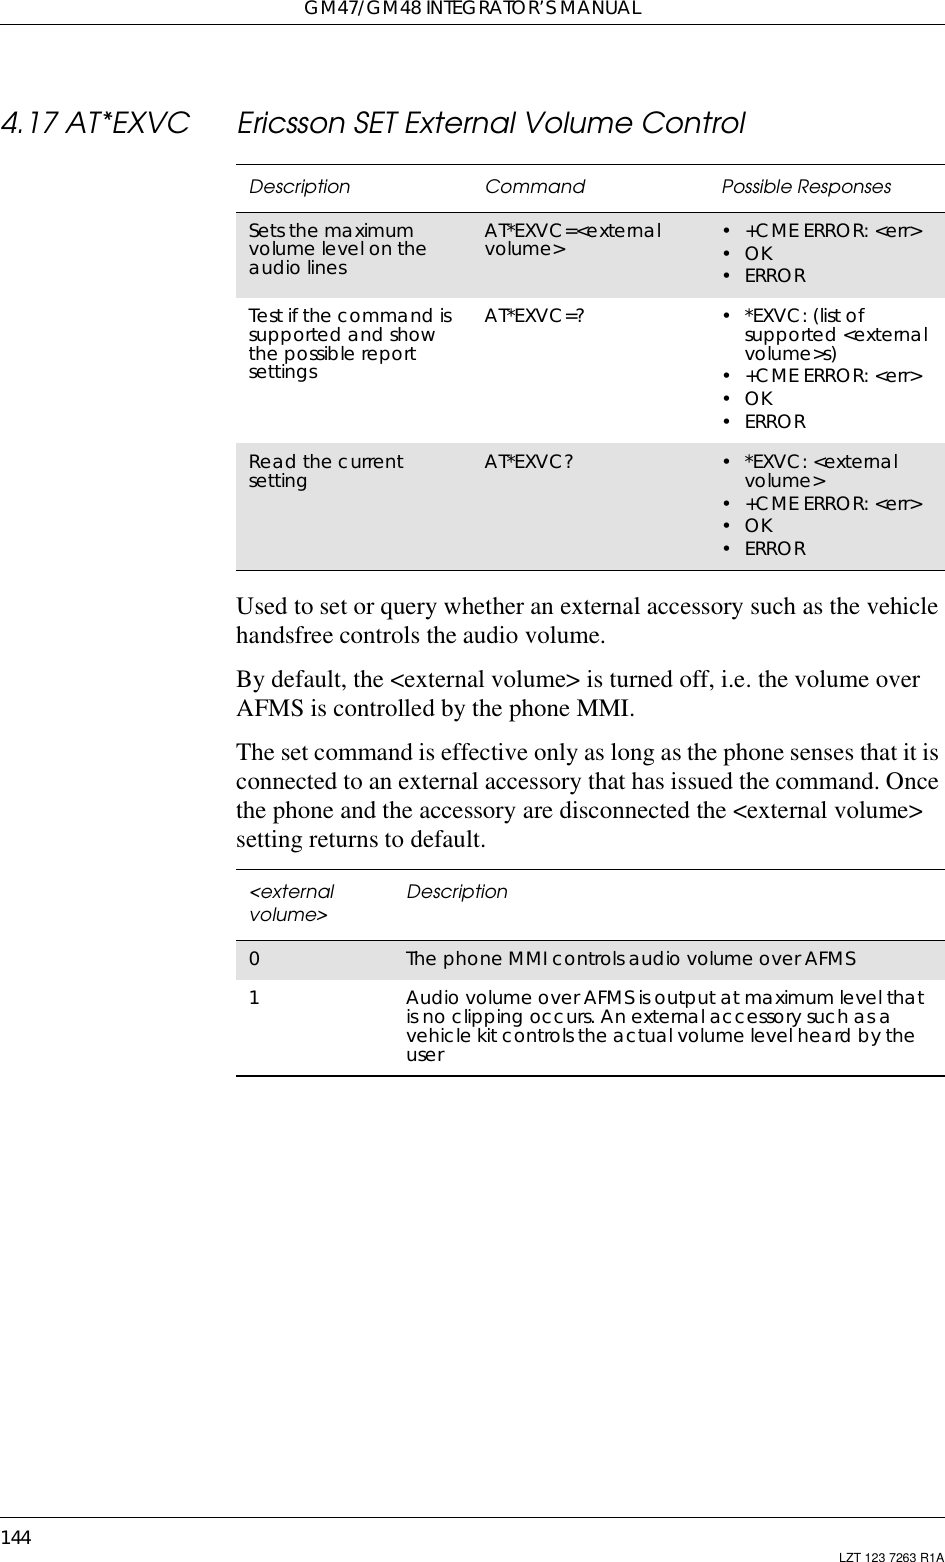 GM47/GM48 INTEGRATOR’S MANUAL144 LZT 123 7263 R1A4.17 AT*EXVC Ericsson SET External Volume ControlUsed to set or query whether an external accessory such as the vehiclehandsfree controls the audio volume.By default, the &lt;external volume&gt; is turned off, i.e. the volume overAFMS is controlled by the phone MMI.The set command is effective only as long as the phone senses that it isconnected to an external accessory that has issued the command. Oncethe phone and the accessory are disconnected the &lt;external volume&gt;setting returns to default.Description Command Possible ResponsesSets the maximumvolume level on theaudio linesAT*EXVC=&lt;externalvolume&gt; •+CMEERROR:&lt;err&gt;•OK•ERRORTest if the command issupported and showthe possible reportsettingsAT*EXVC=? •*EXVC:(listofsupported &lt;externalvolume&gt;s)•+CMEERROR:&lt;err&gt;•OK•ERRORRead the currentsetting AT*EXVC? •*EXVC:&lt;externalvolume&gt;•+CMEERROR:&lt;err&gt;•OK•ERROR&lt;externalvolume&gt; Description0The phone MMI controls audio volume over AFMS1Audio volume over AFMS is output at maximum level thatis no clipping occurs. An external accessory such as avehicle kit controls the actual volume level heard by theuser